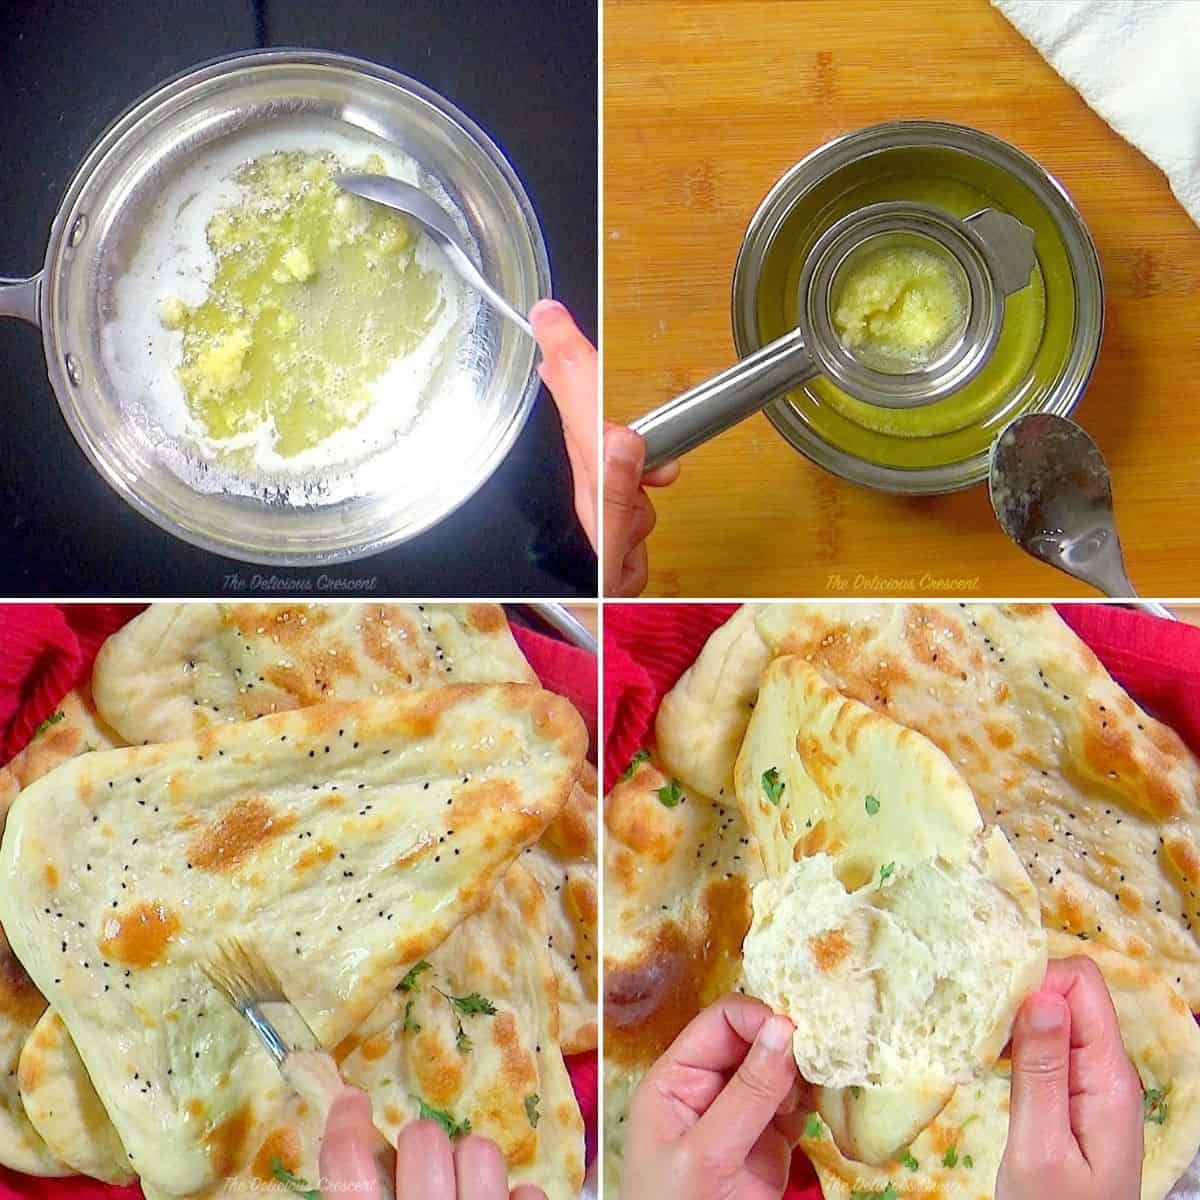 Make garlic butter and brush on baked naan.